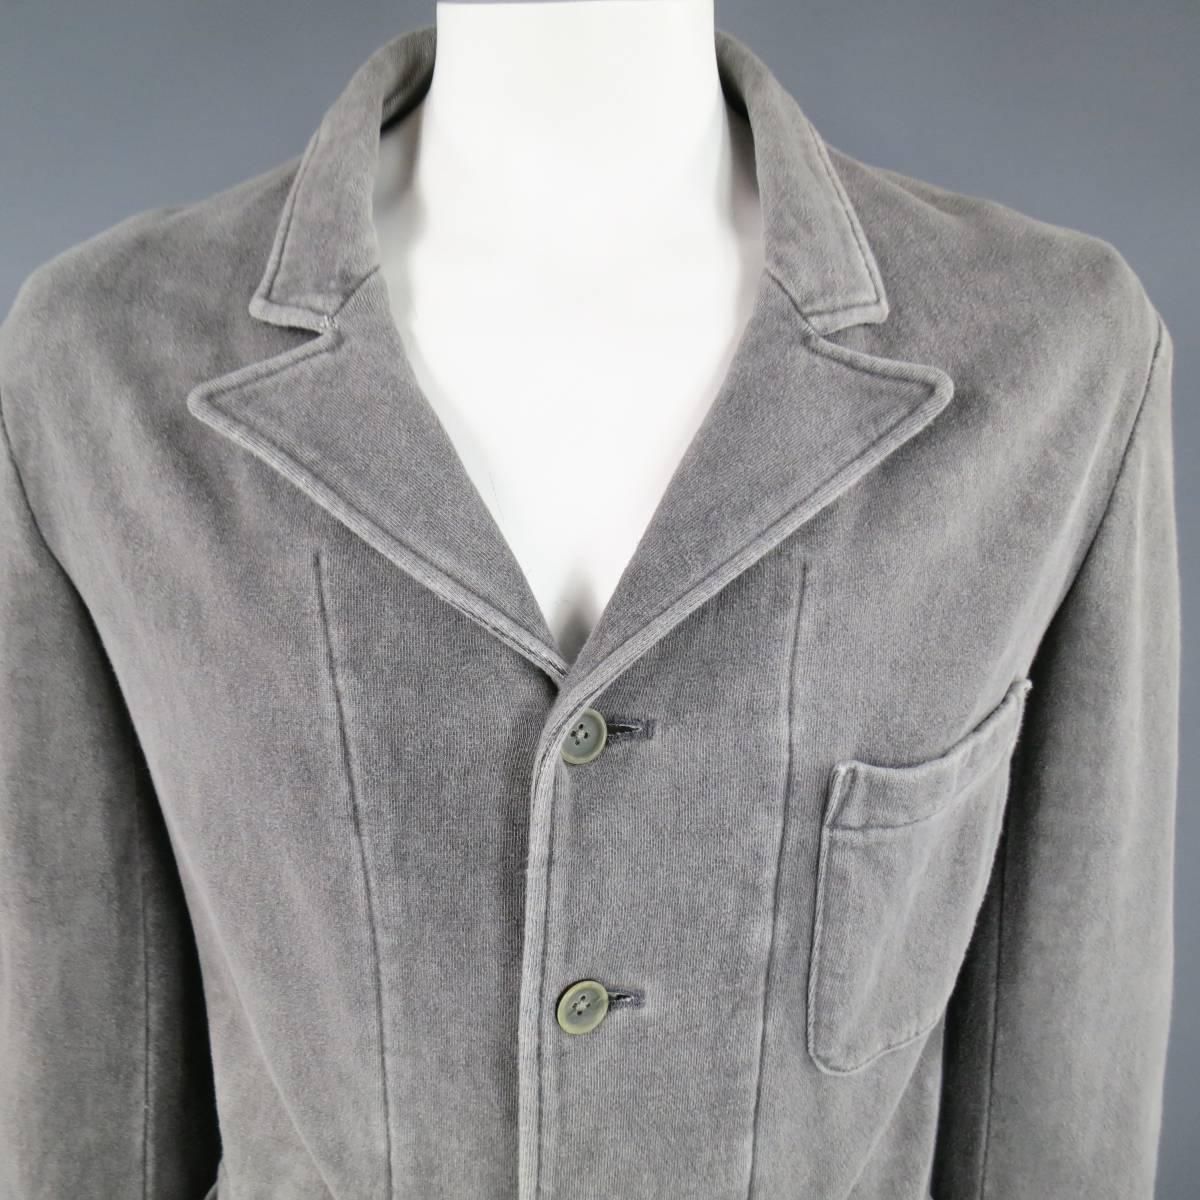 This casual  YOHJI YAMAMOTO sport coat jacket comes in washed gray cotton jersey with a pointed lapel, 4 button closure, and patch pockets. Made in Japan.
 
Excellent Pre-Owned Condition.
Marked: 3
 
Measurements:
 
Shoulder: 21 in.
Chest: